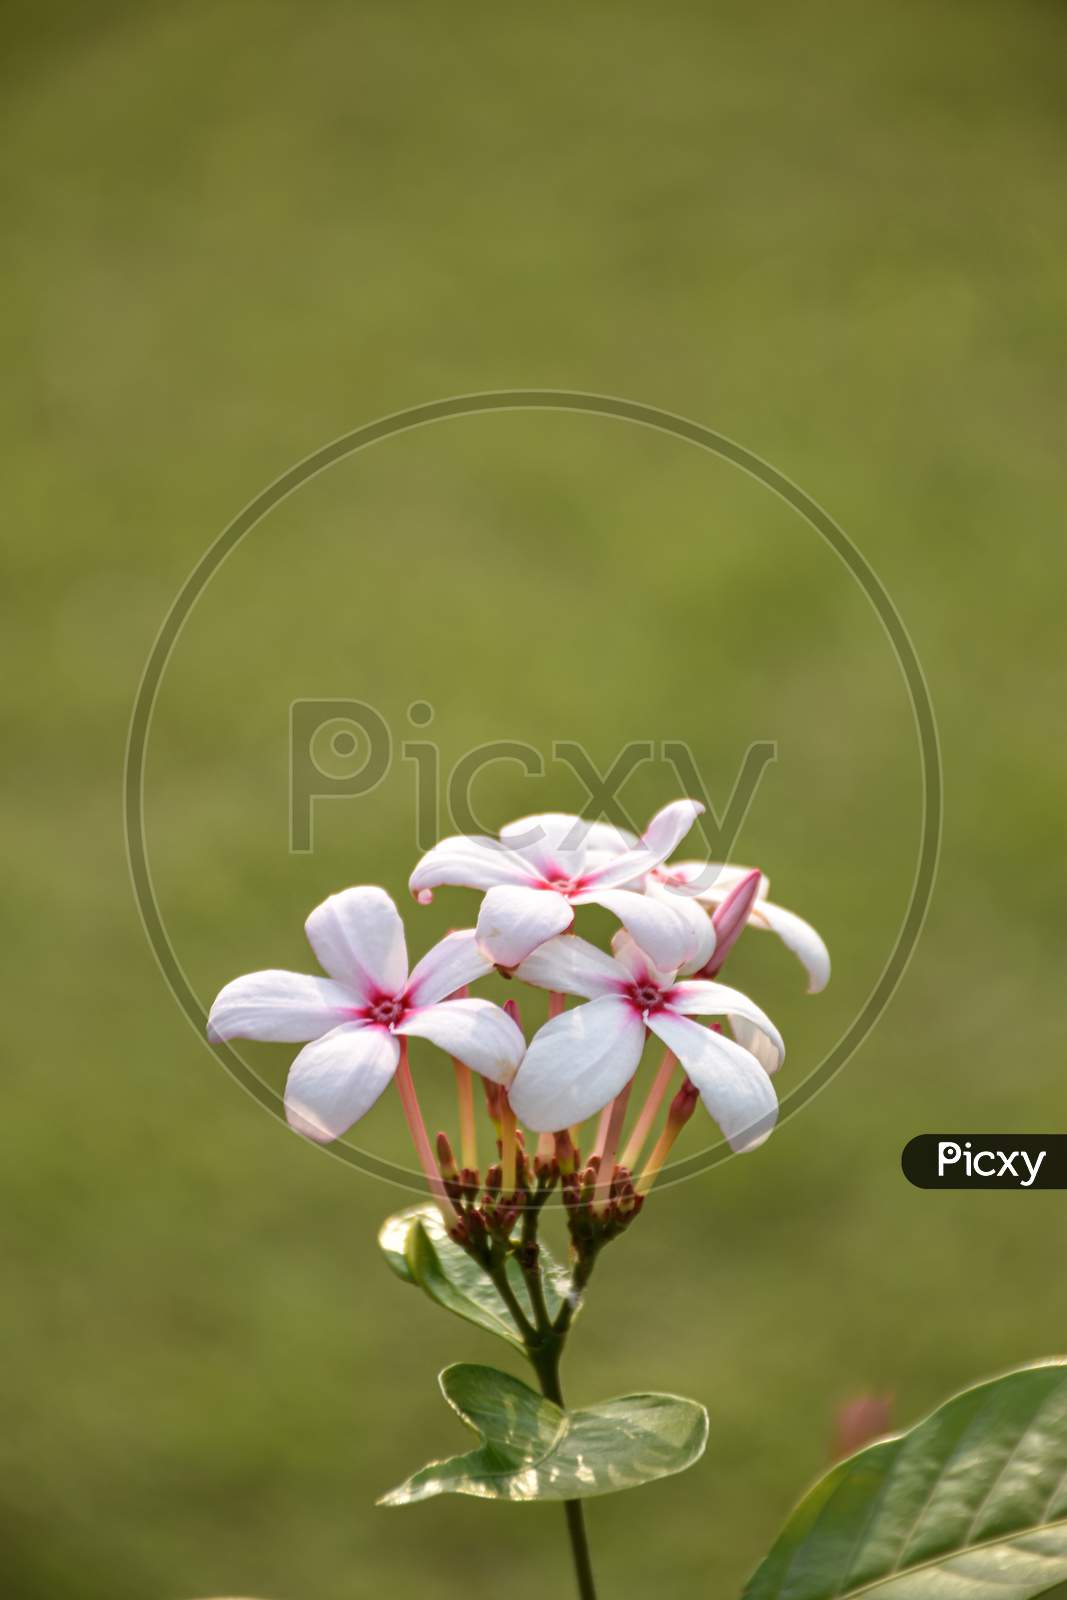 Closeup Picture Of Kopsia Flower Or Kopsia Fruticosa, Is A Genus Of Plant In Family Apocynaceae First Described As A Genus In 1823